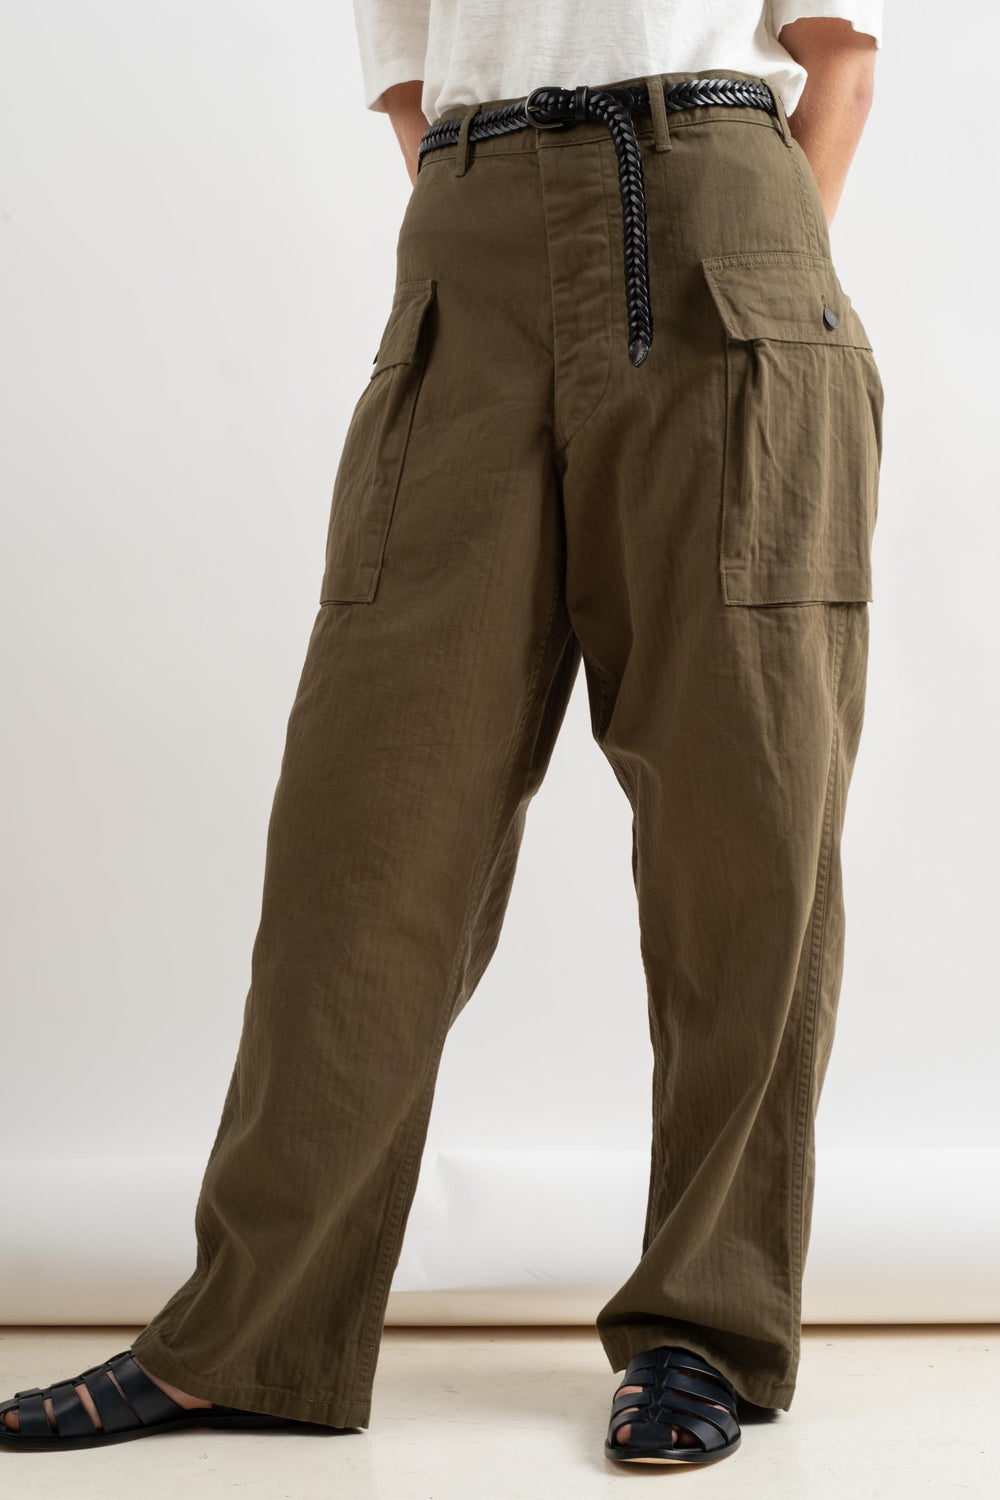 US Army 2-Pocket Cargo In Army Green